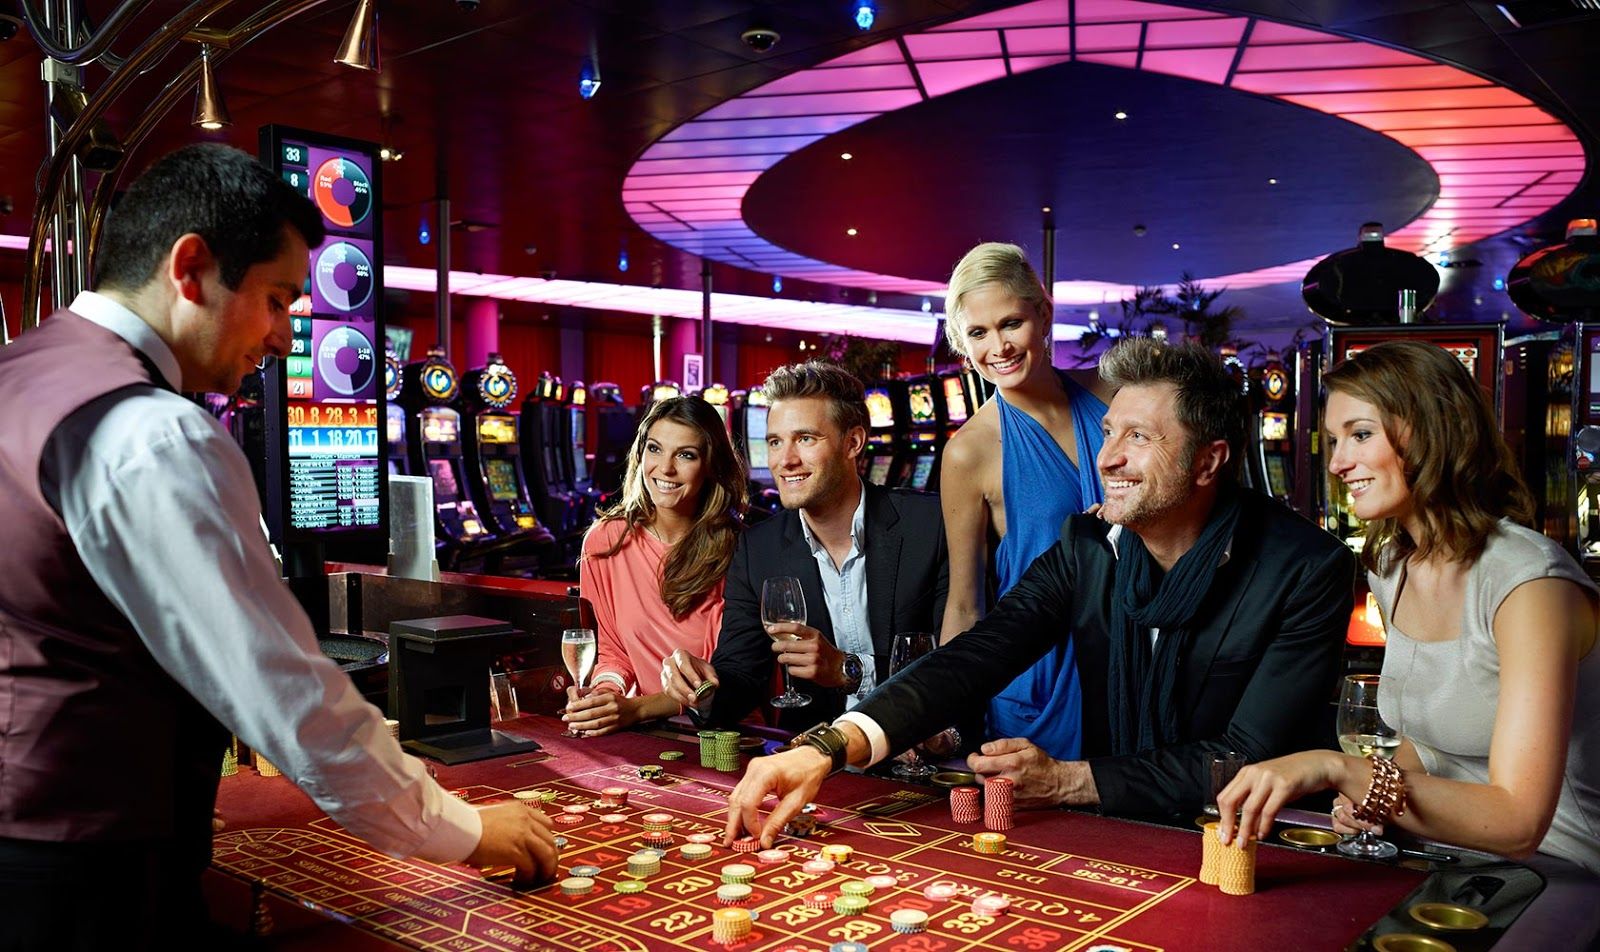 What Everybody Should Know about Casino